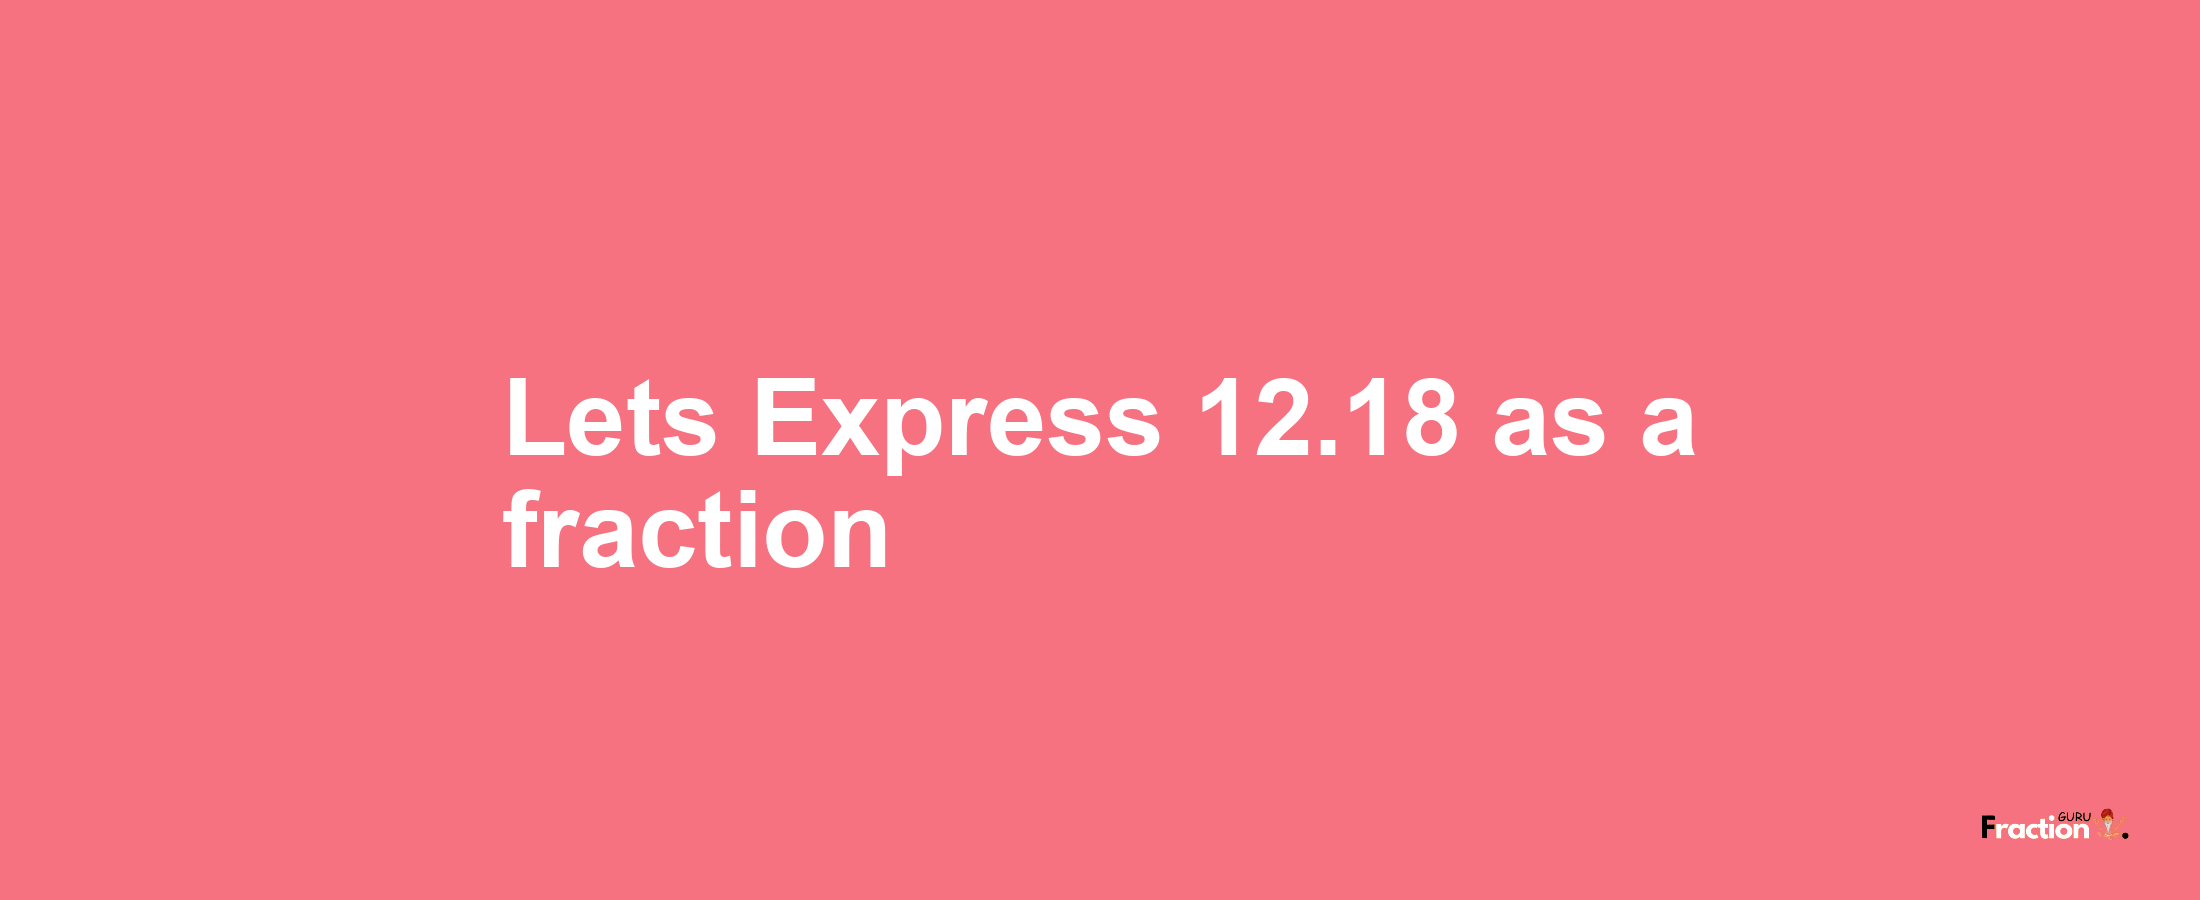 Lets Express 12.18 as afraction